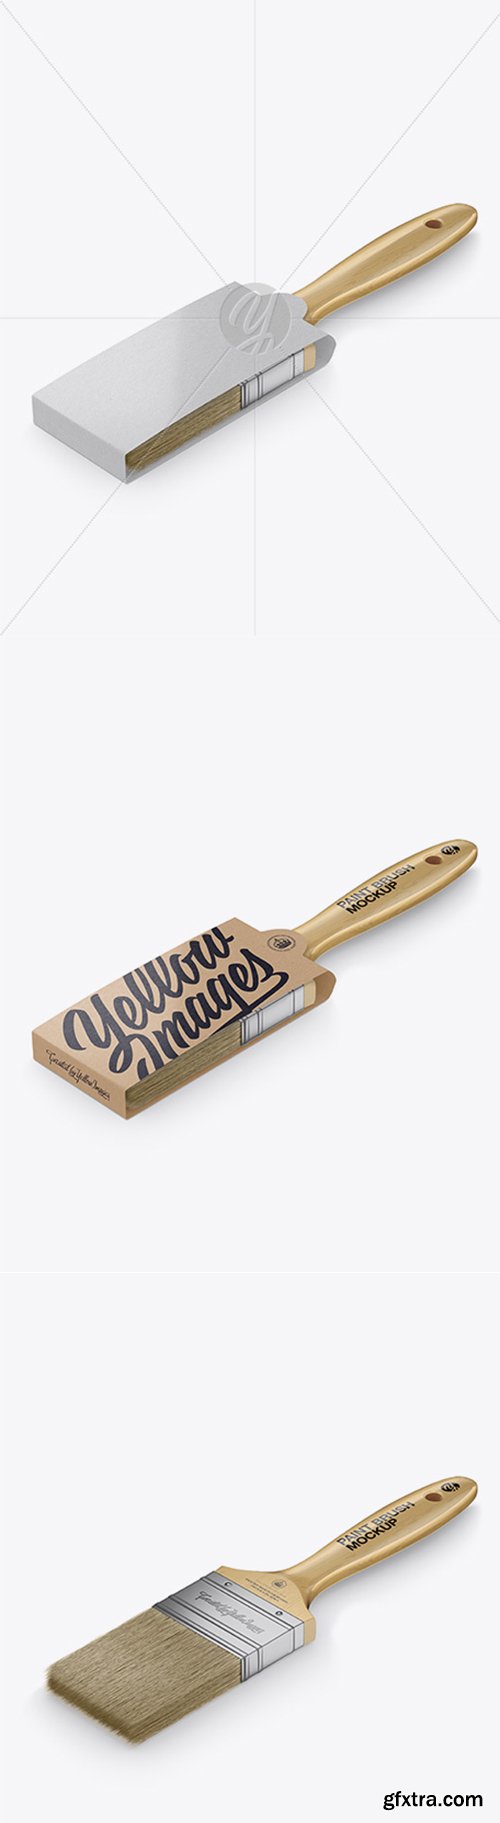 Brush With Wooden Grip & Kraft Label Mockup - Half Side View (High-Angle Shot) 34247